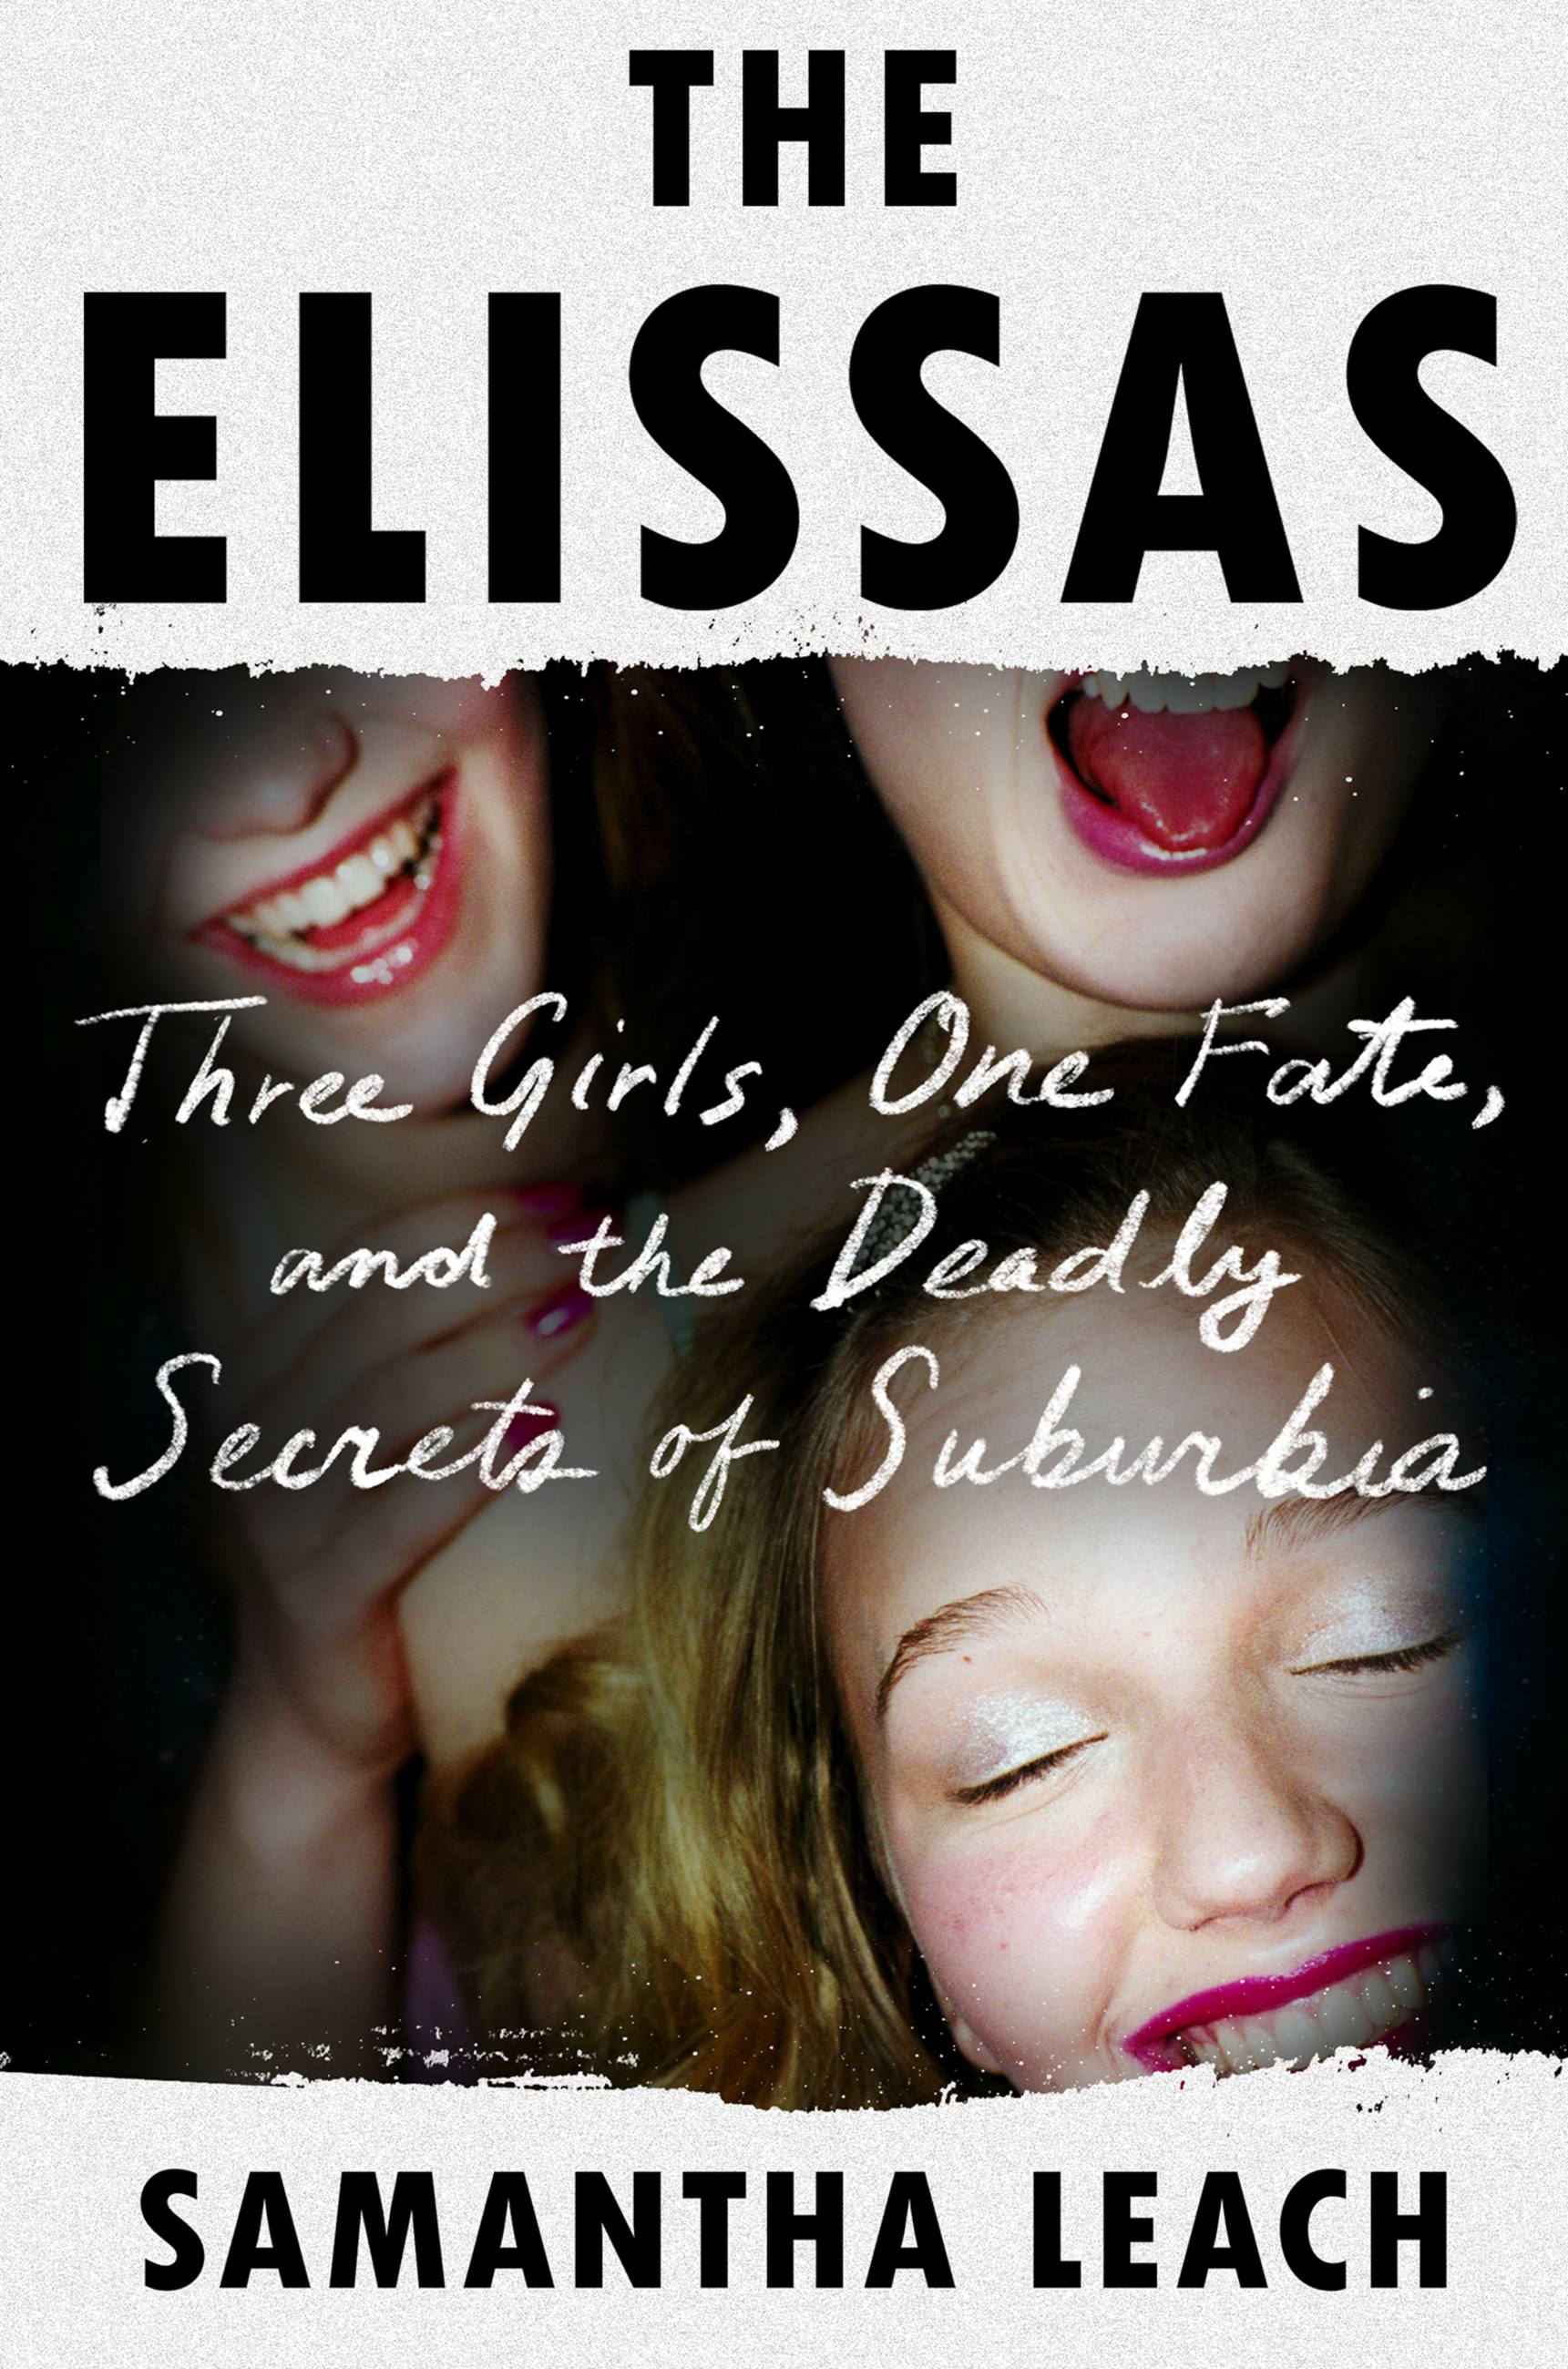 Amlss Tit Skinny - The Elissas by Samantha Leach | Hachette Book Group